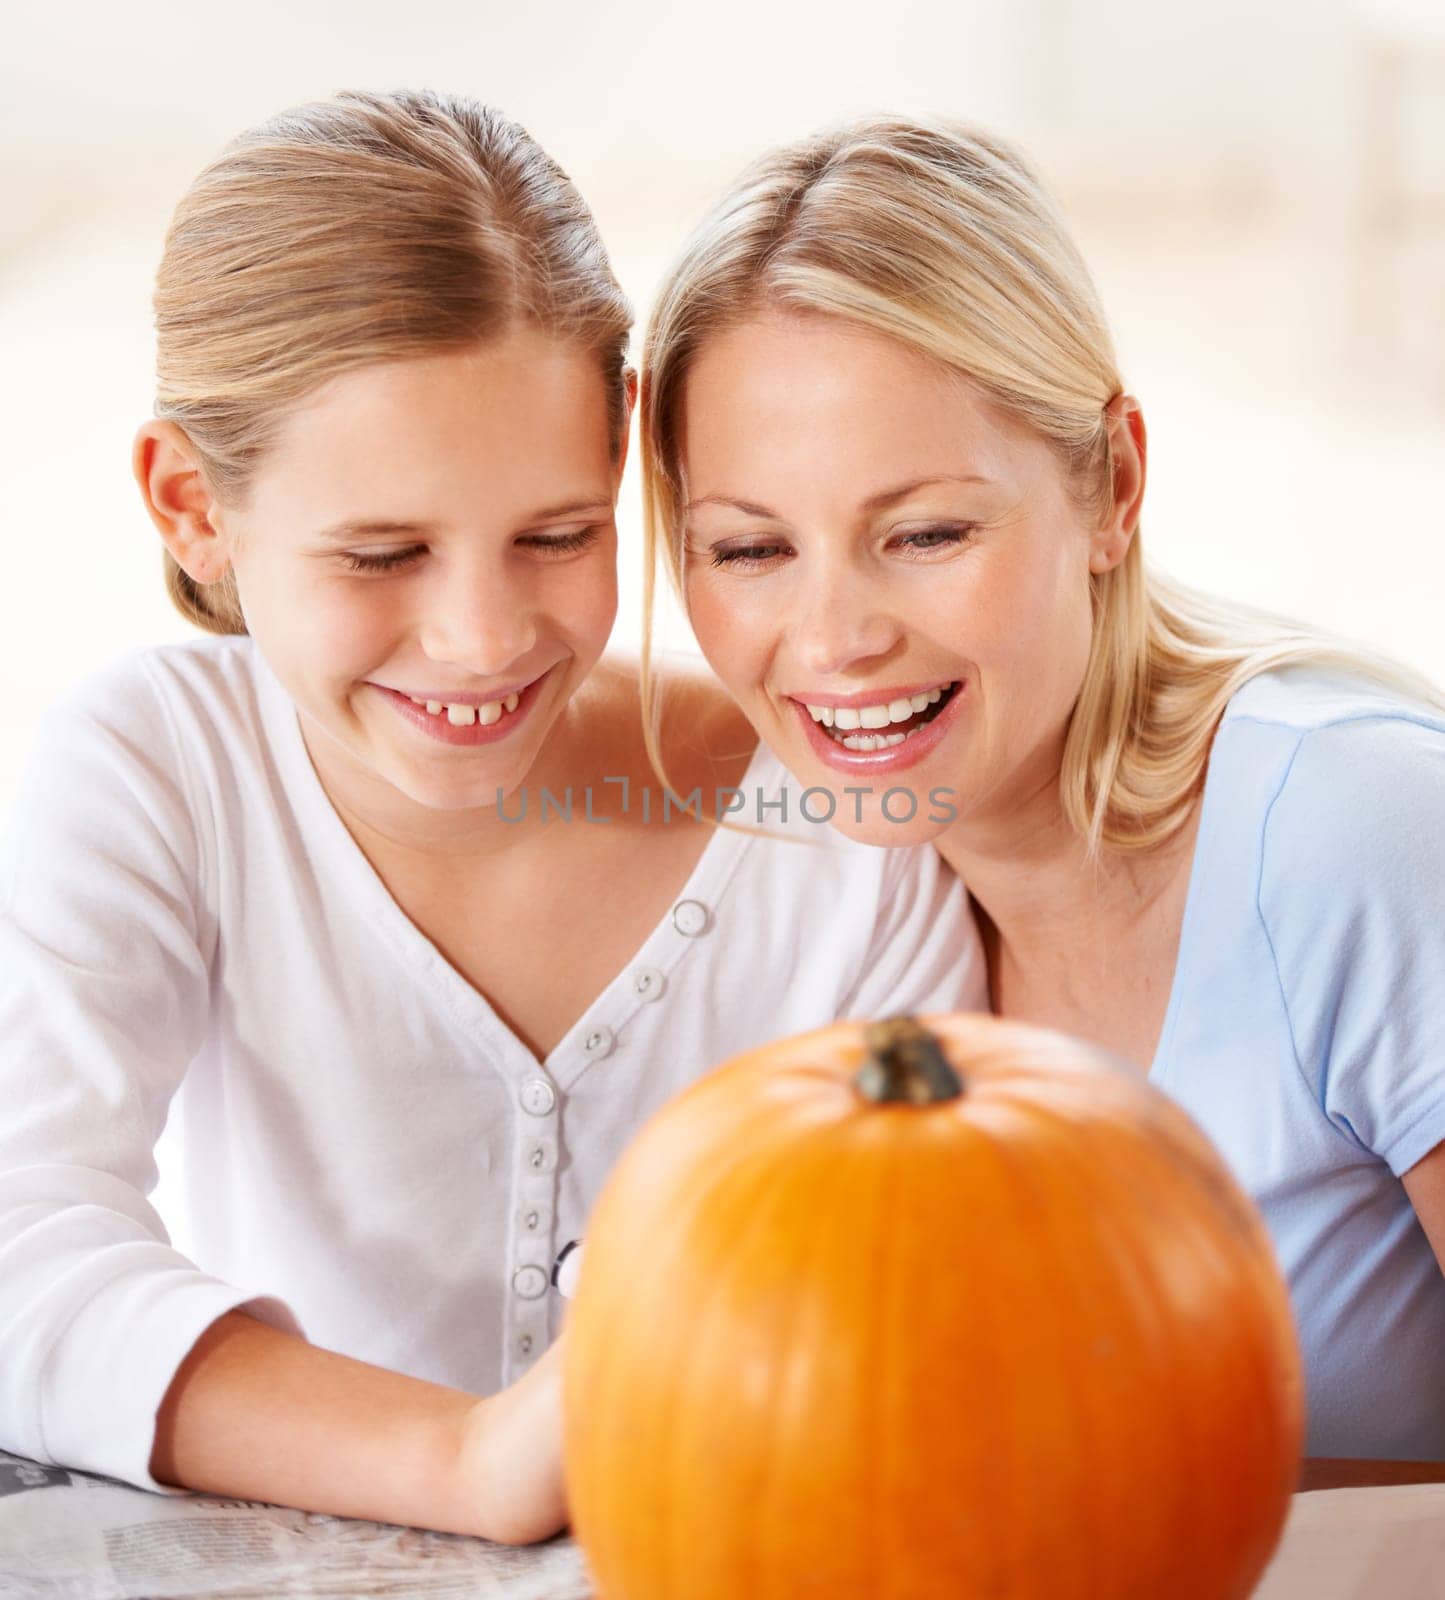 Child, mother and smile with pumpkin to celebrate halloween party together at home. Happy young girl, mom and family carving orange vegetable for holiday lantern, decoration and fun creative craft by YuriArcurs